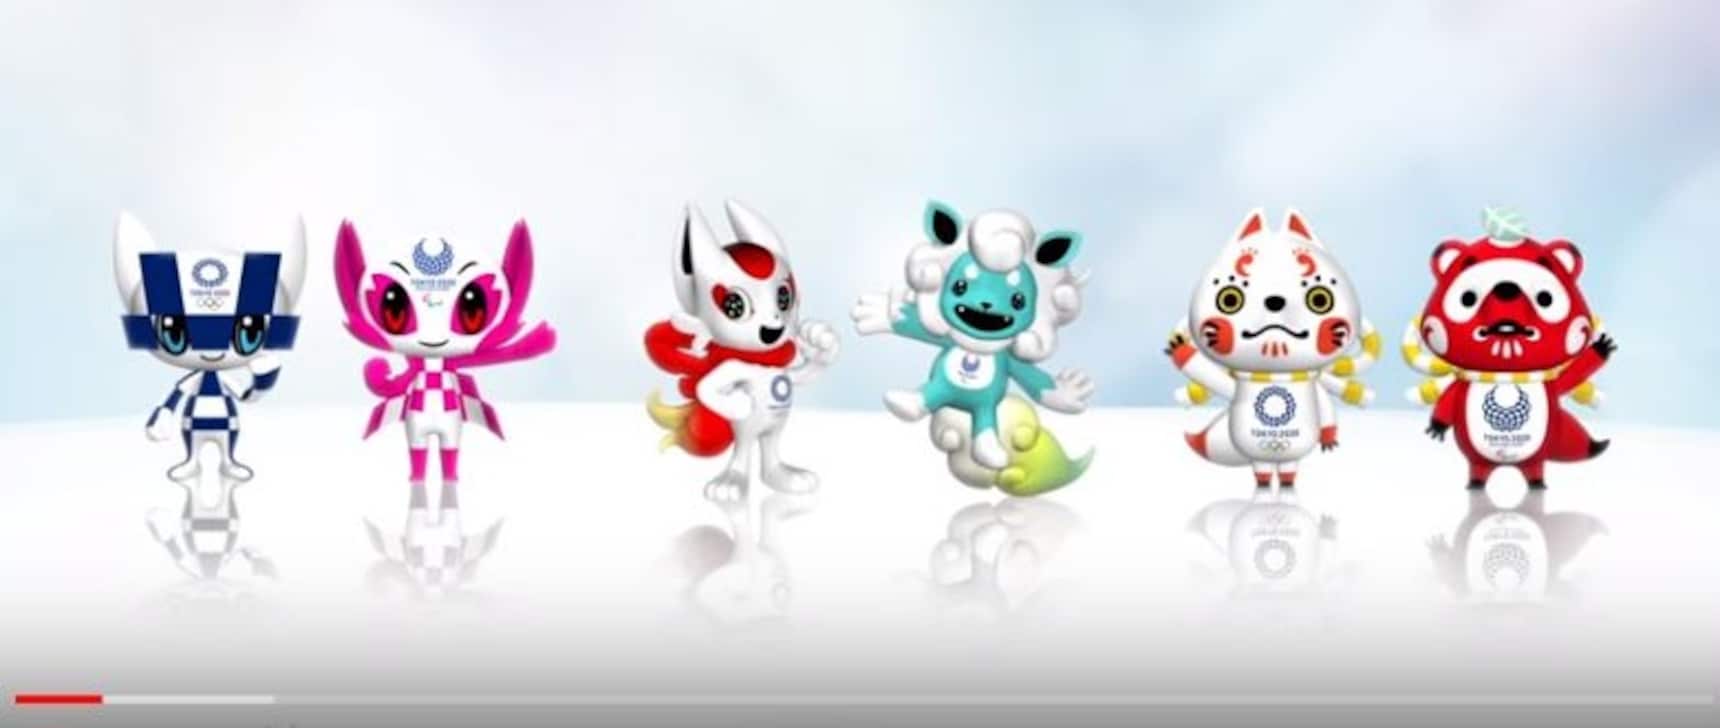 Final 3 Mascot Pairs for Tokyo 2020 Olympics